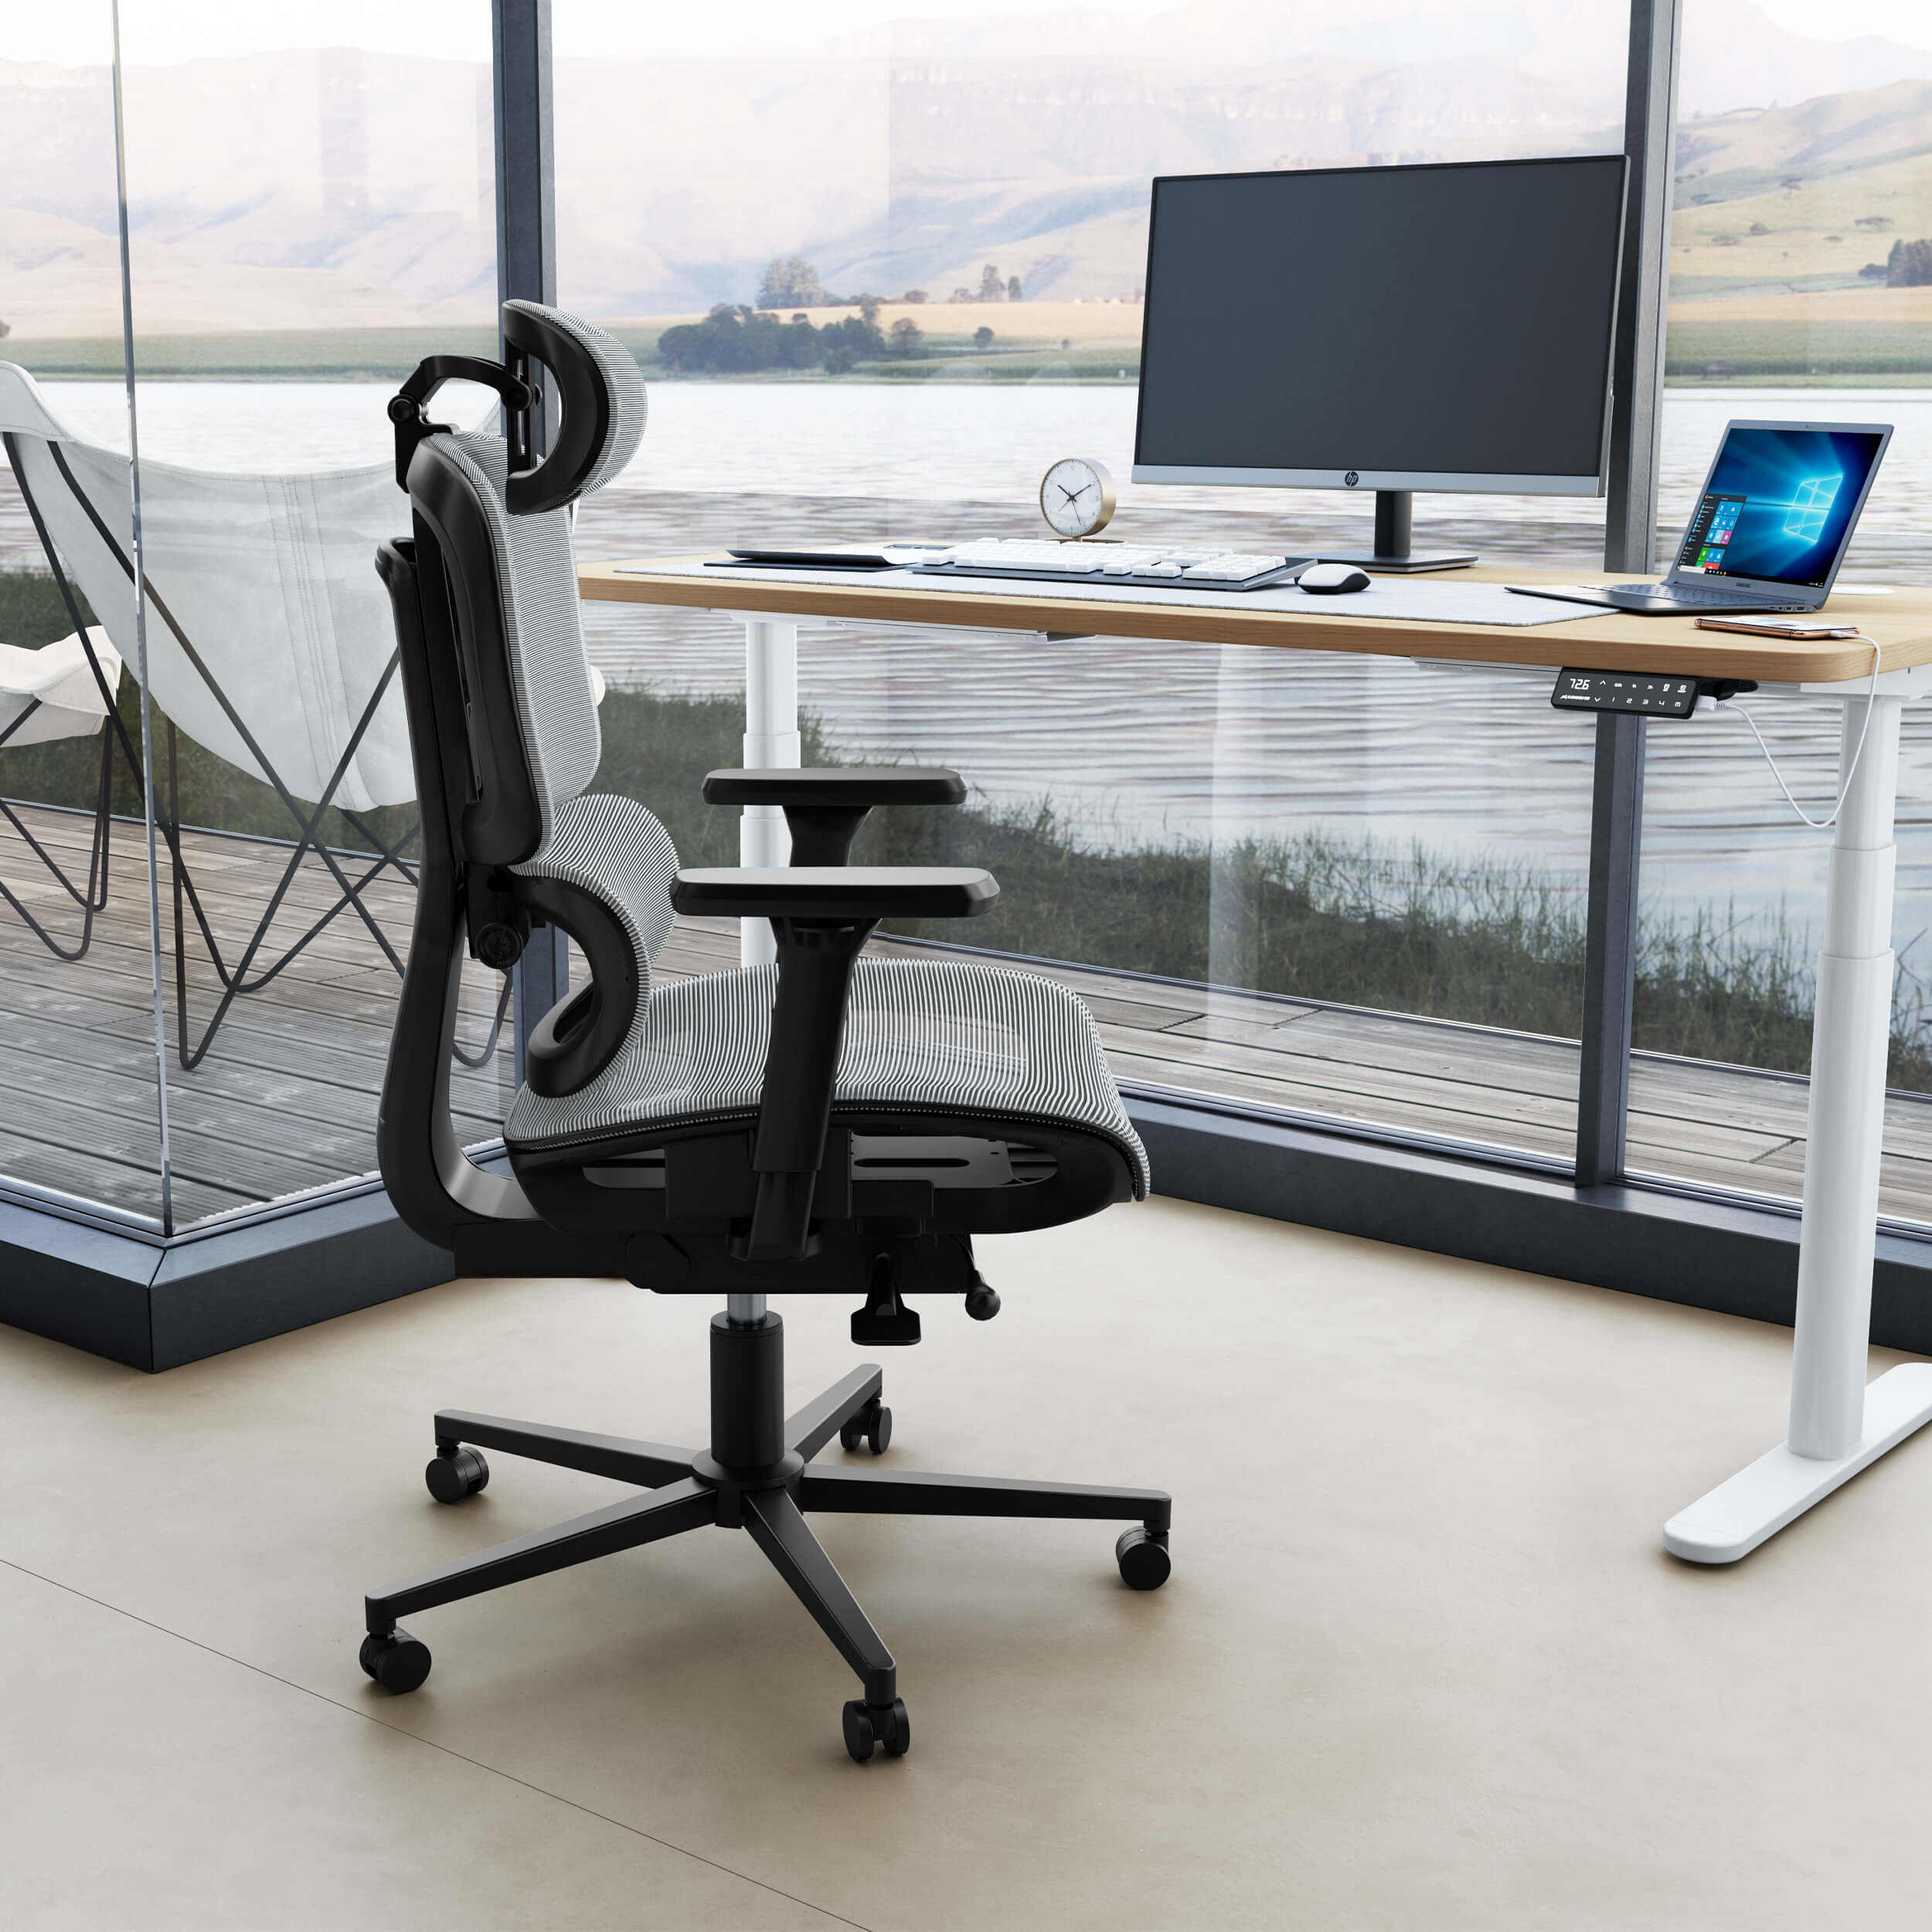 Maidesite ergonomic office chair for people comfortabke work at home